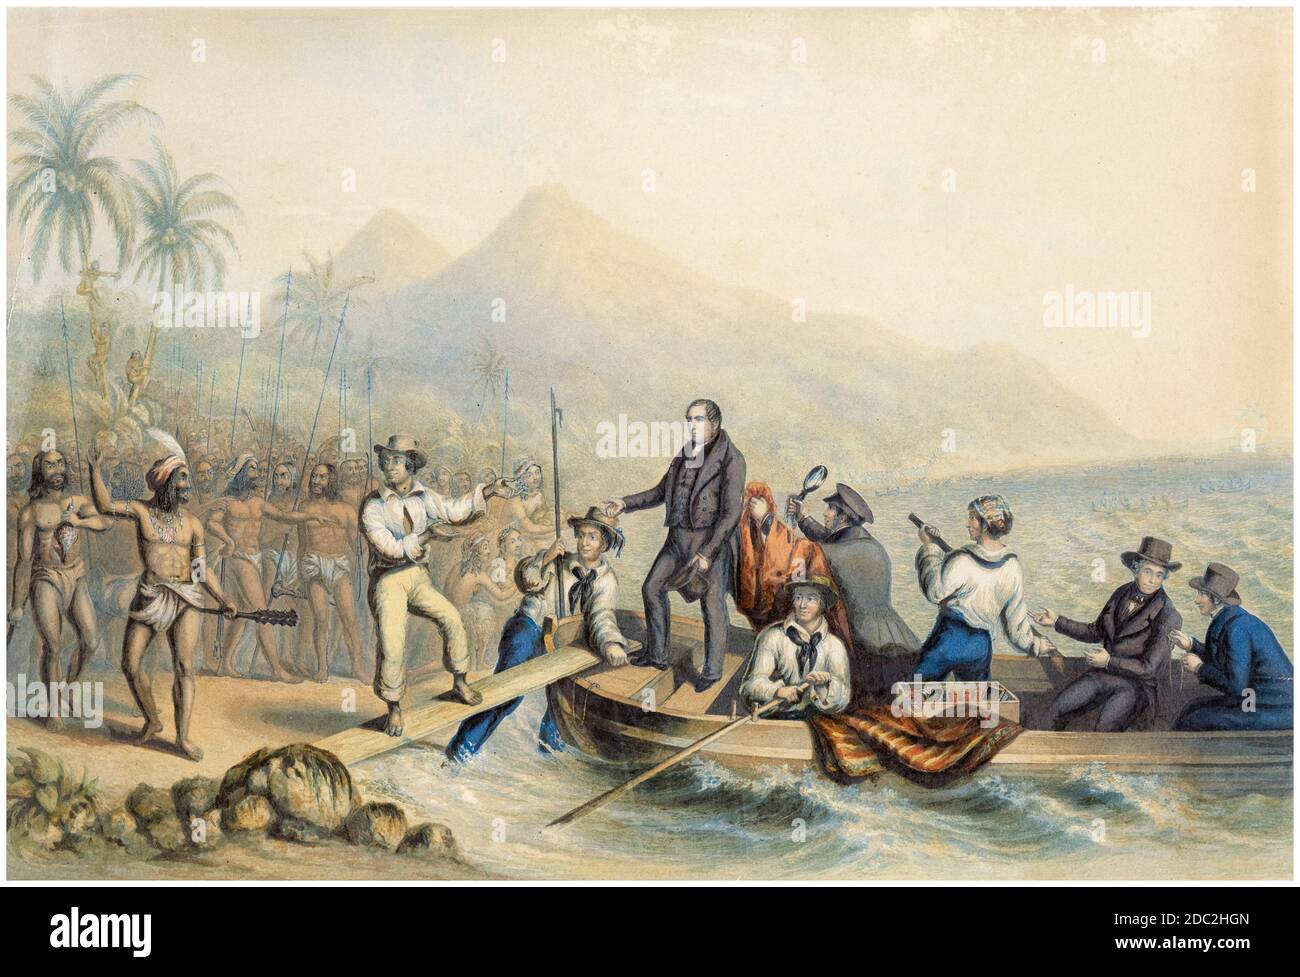 Missionary The Reverend John Williams (1796-1839), at Tanna in the South Seas, the Day Before he was Massacred, woodcut print by George Baxter, 1841 Stock Photo